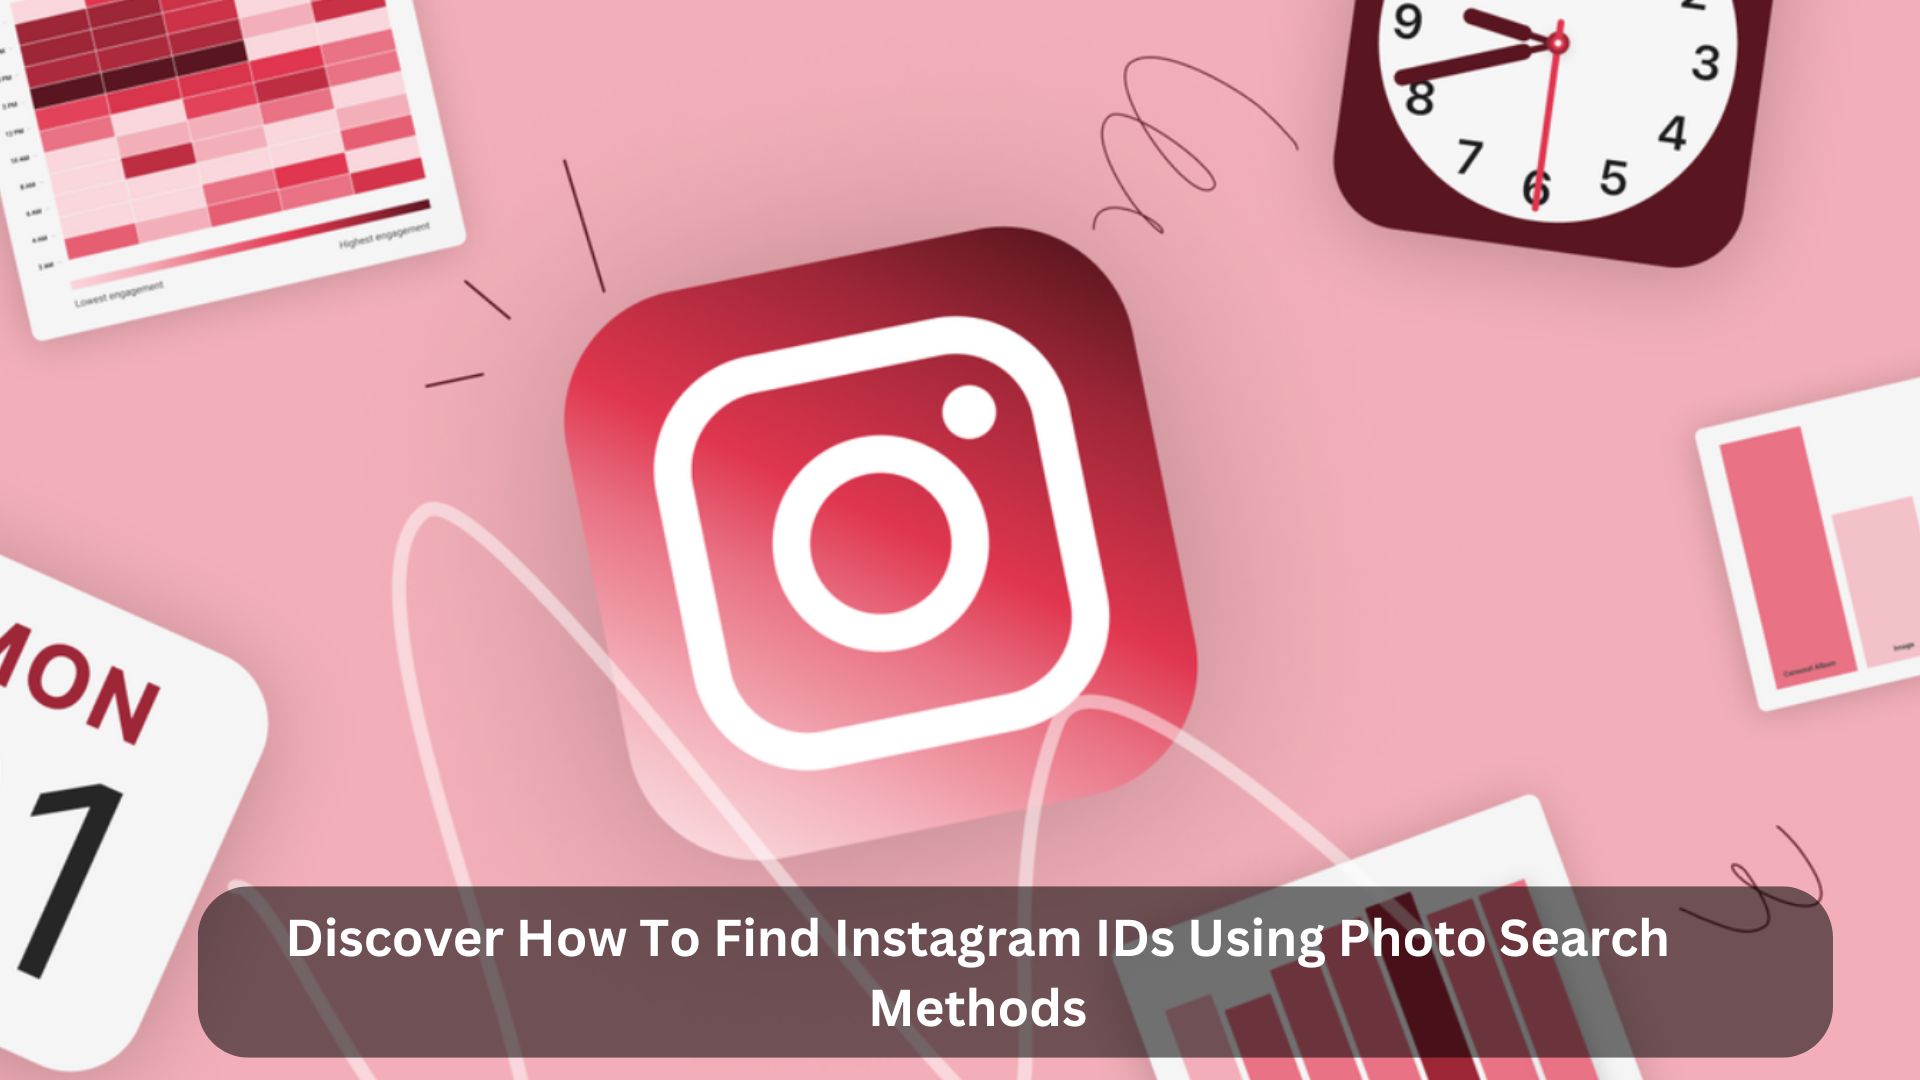 Discover-How-To-Find-Instagram-IDs-Using-Photo-Search-Methods